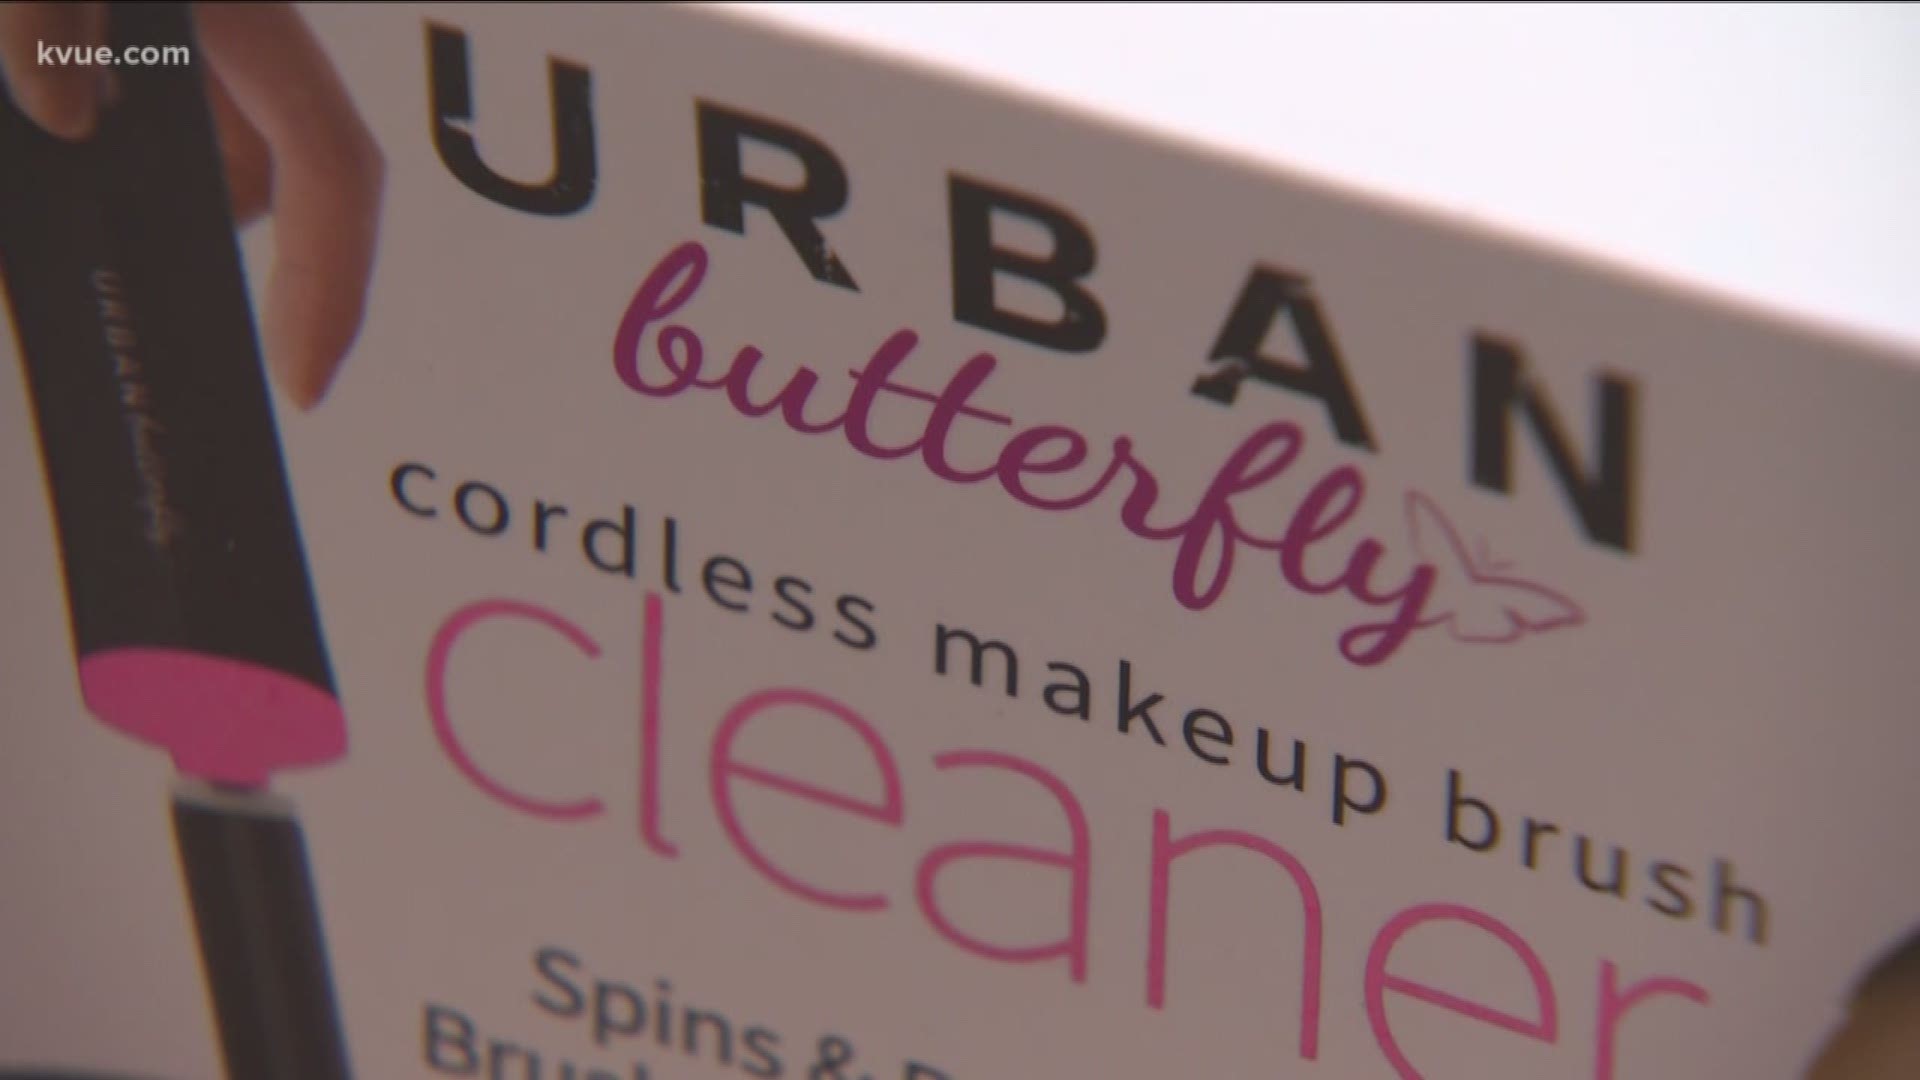 The product promises to clean and dry your makeup brushes in just 30 seconds! But does it work?